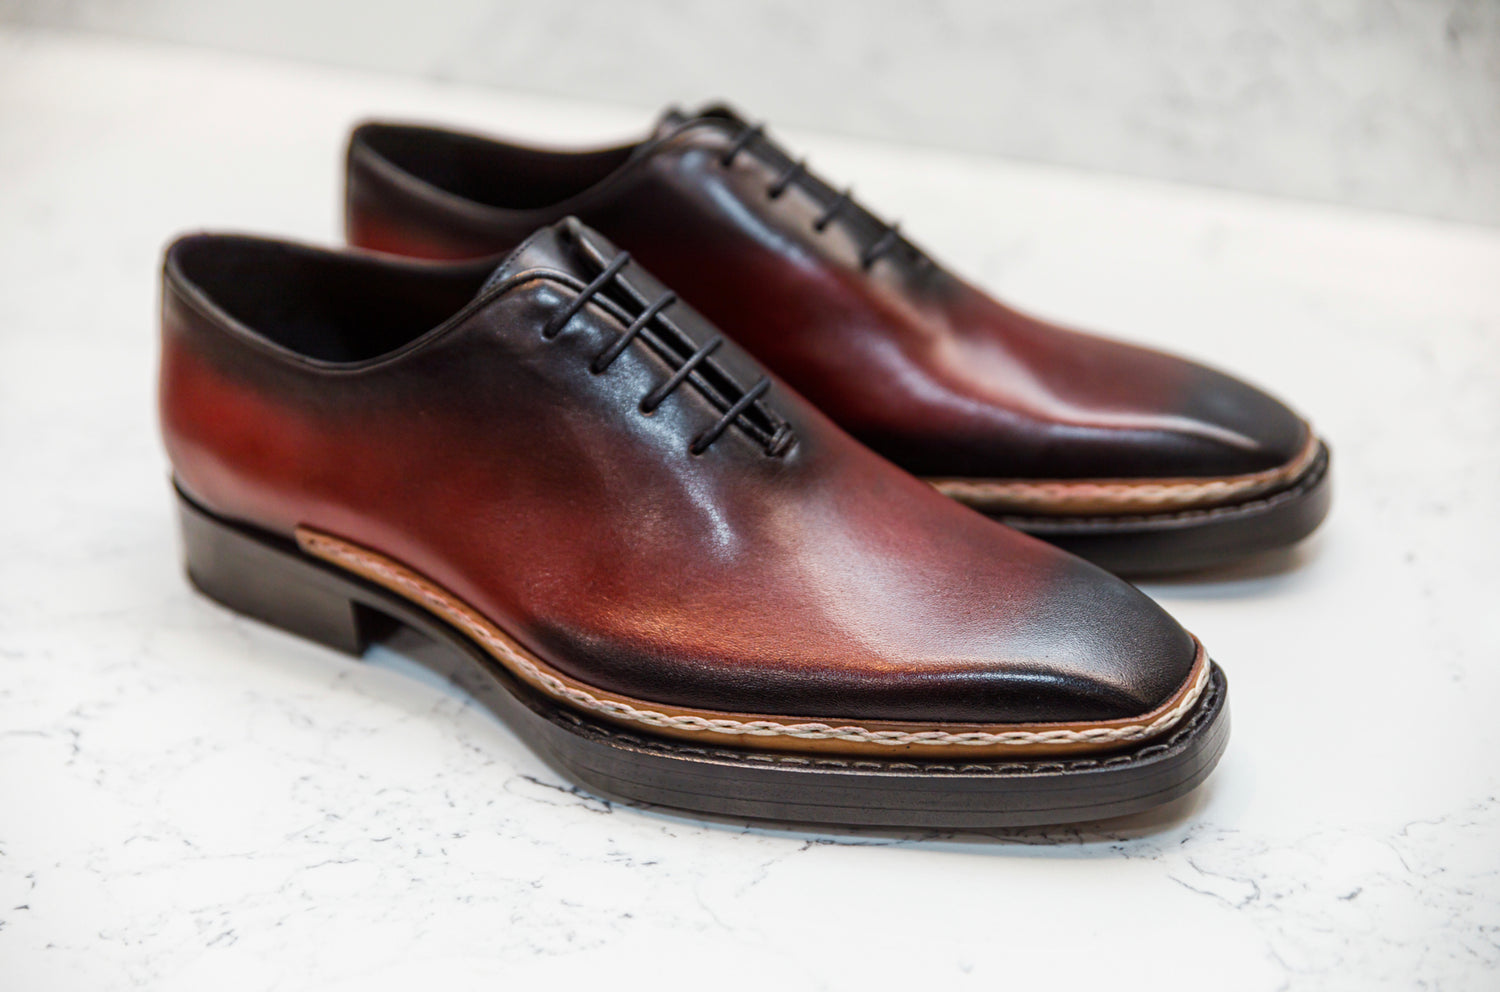 The Norwegian Welted Shoes - Brogues by Urbbana